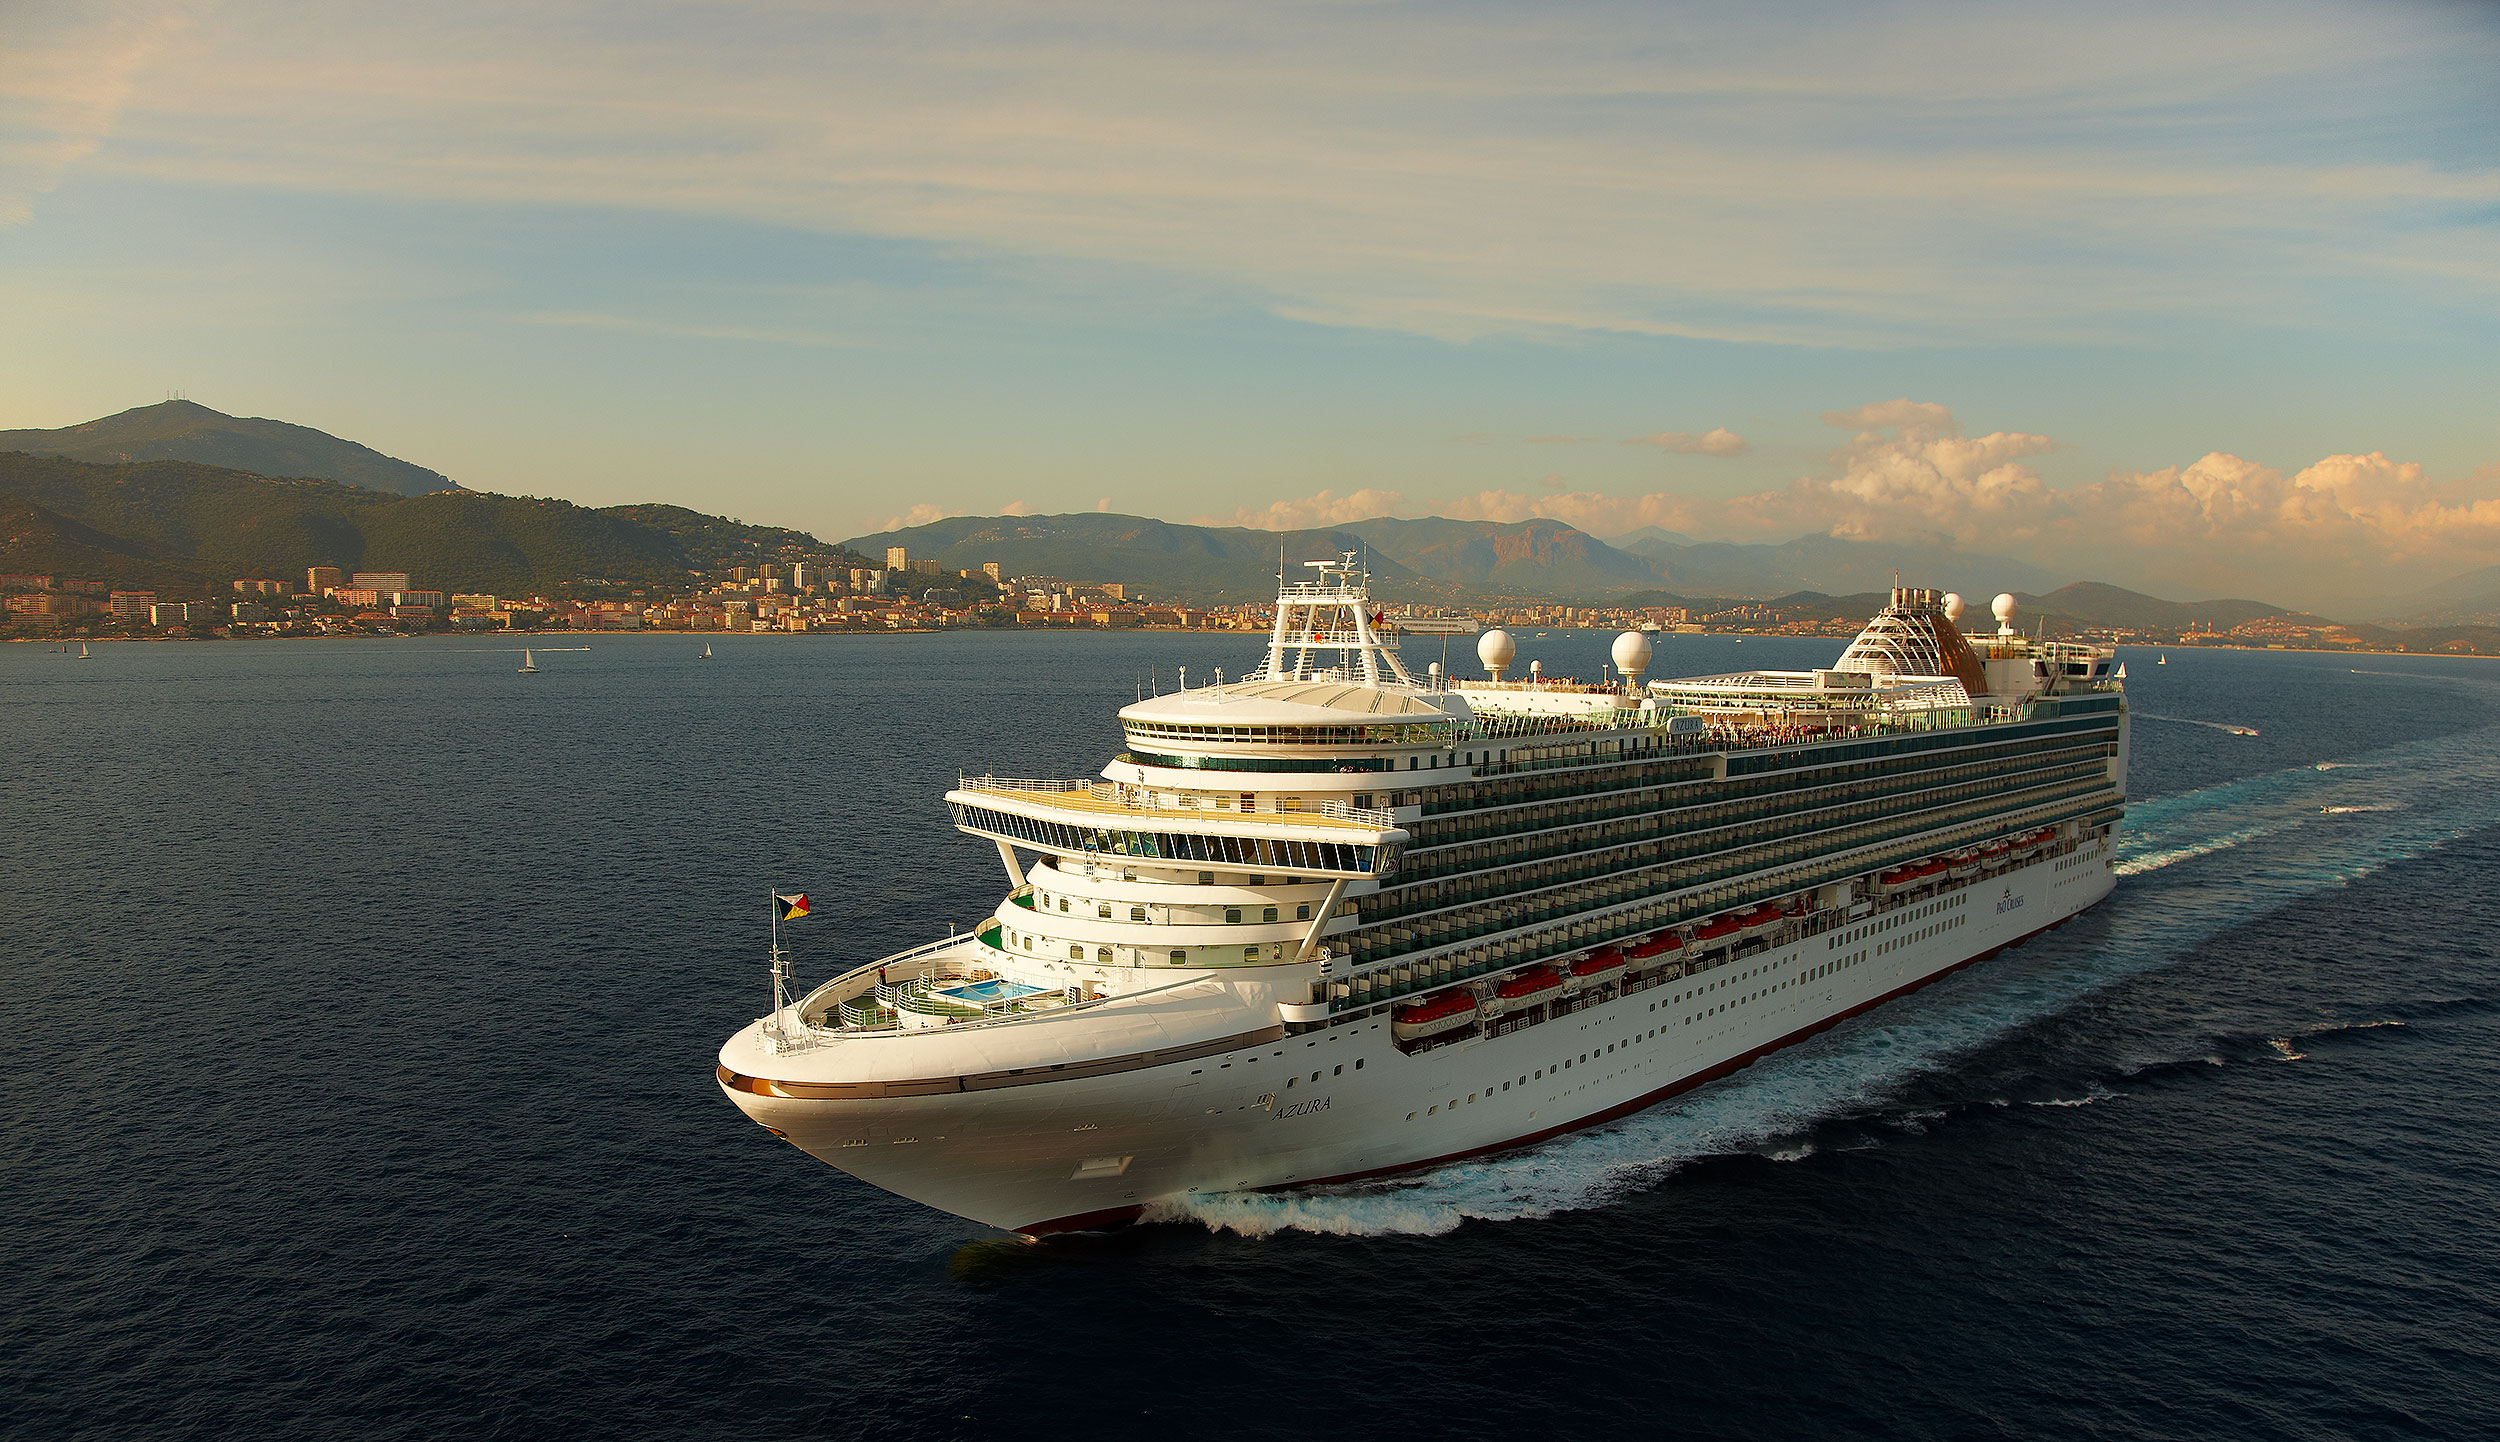 Corsica, Italy, for P&O Cruises.  Aerial photography by Mike Caldwell